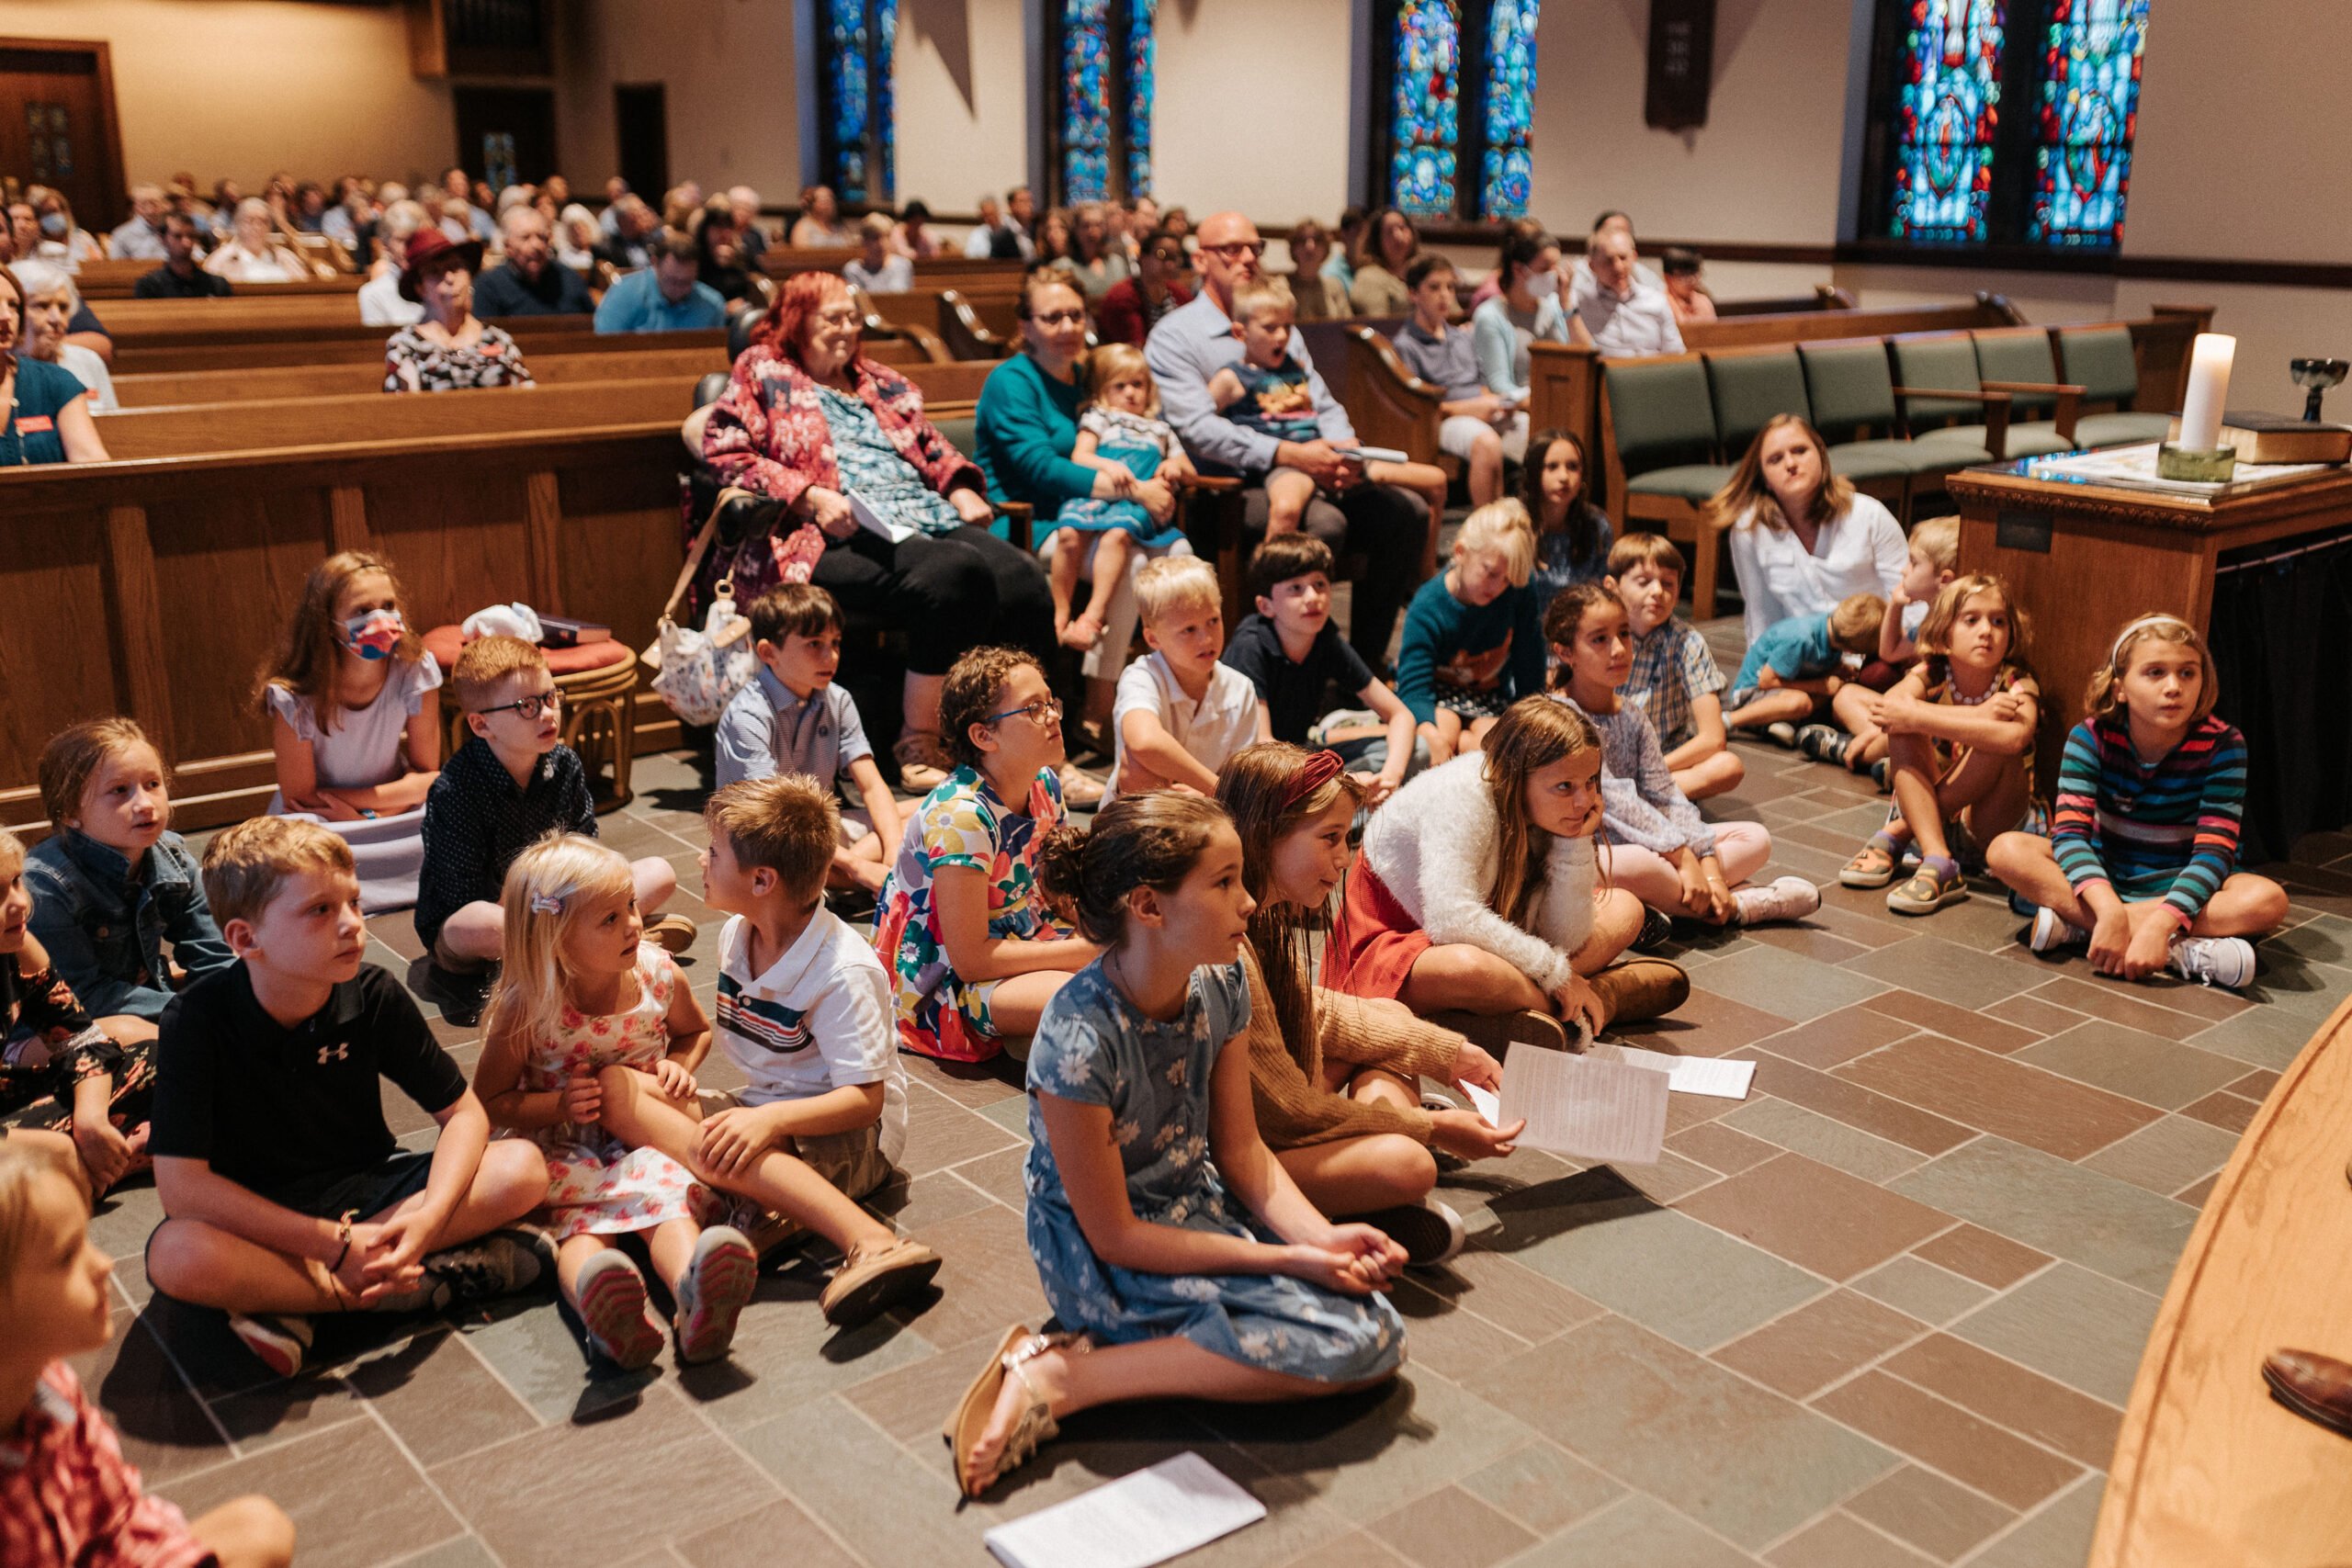 photo of young children sitting on the floor in the church looking towards the front of the church.